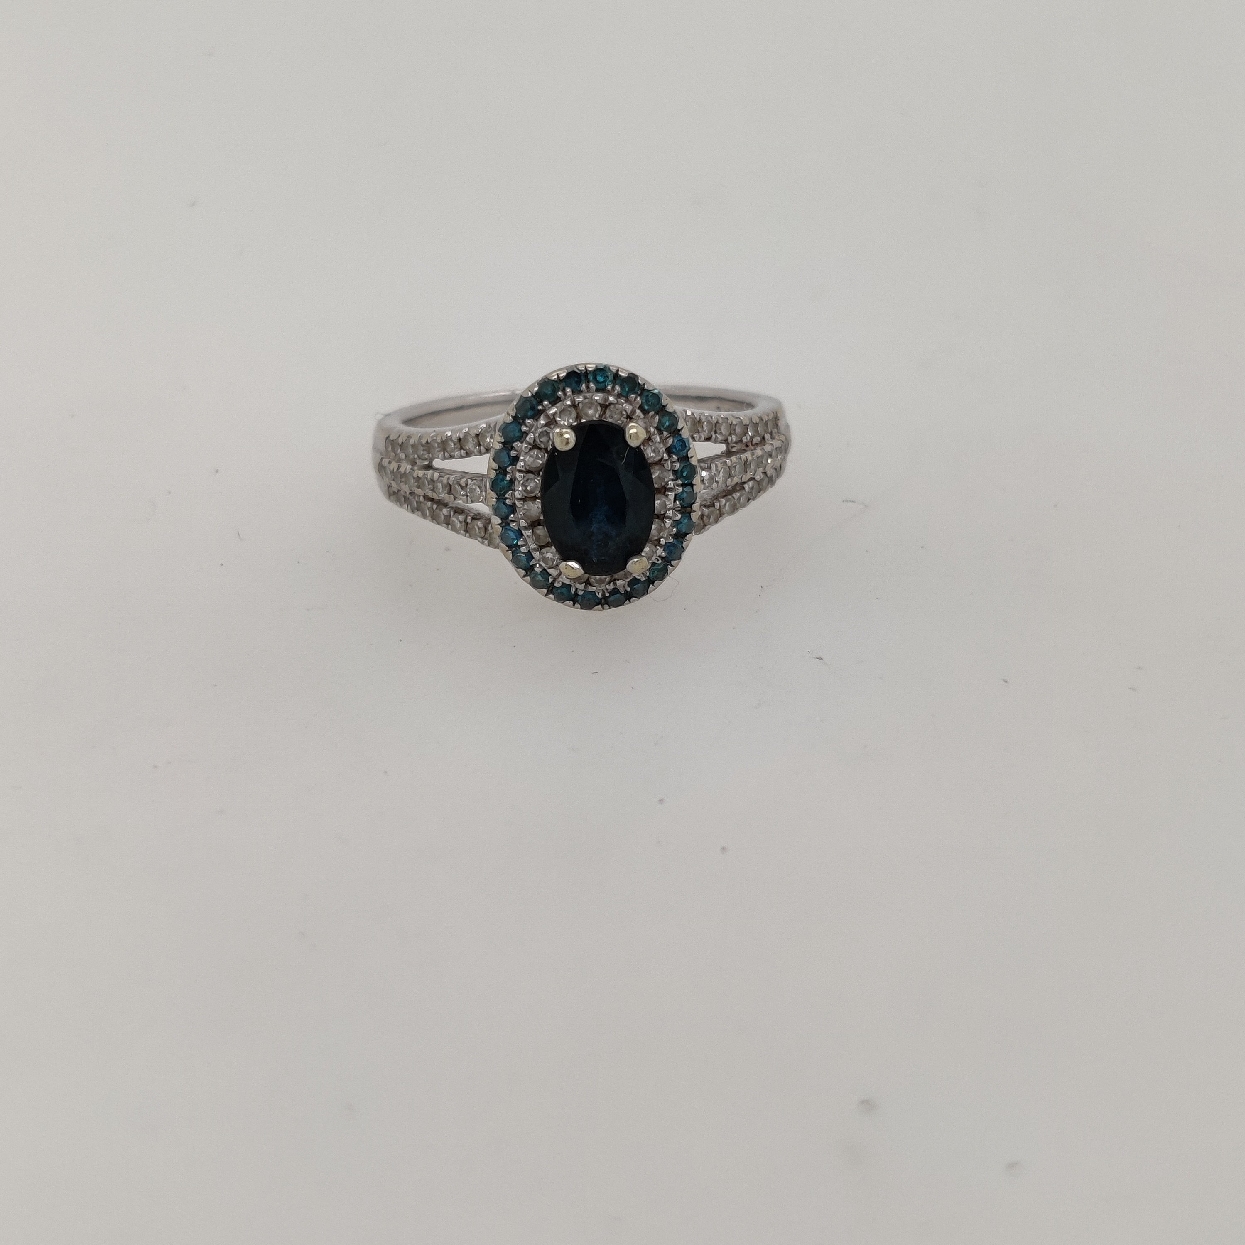 14K White Gold Sapphire Ring with Double Diamond Halo and Triple Shank; Size 6.75

Sapphire is 5x7.5mm; White Diamonds are approximately 0.68CTTW; and Irradiated Blue Diamonds are approximately 0.25CTTW